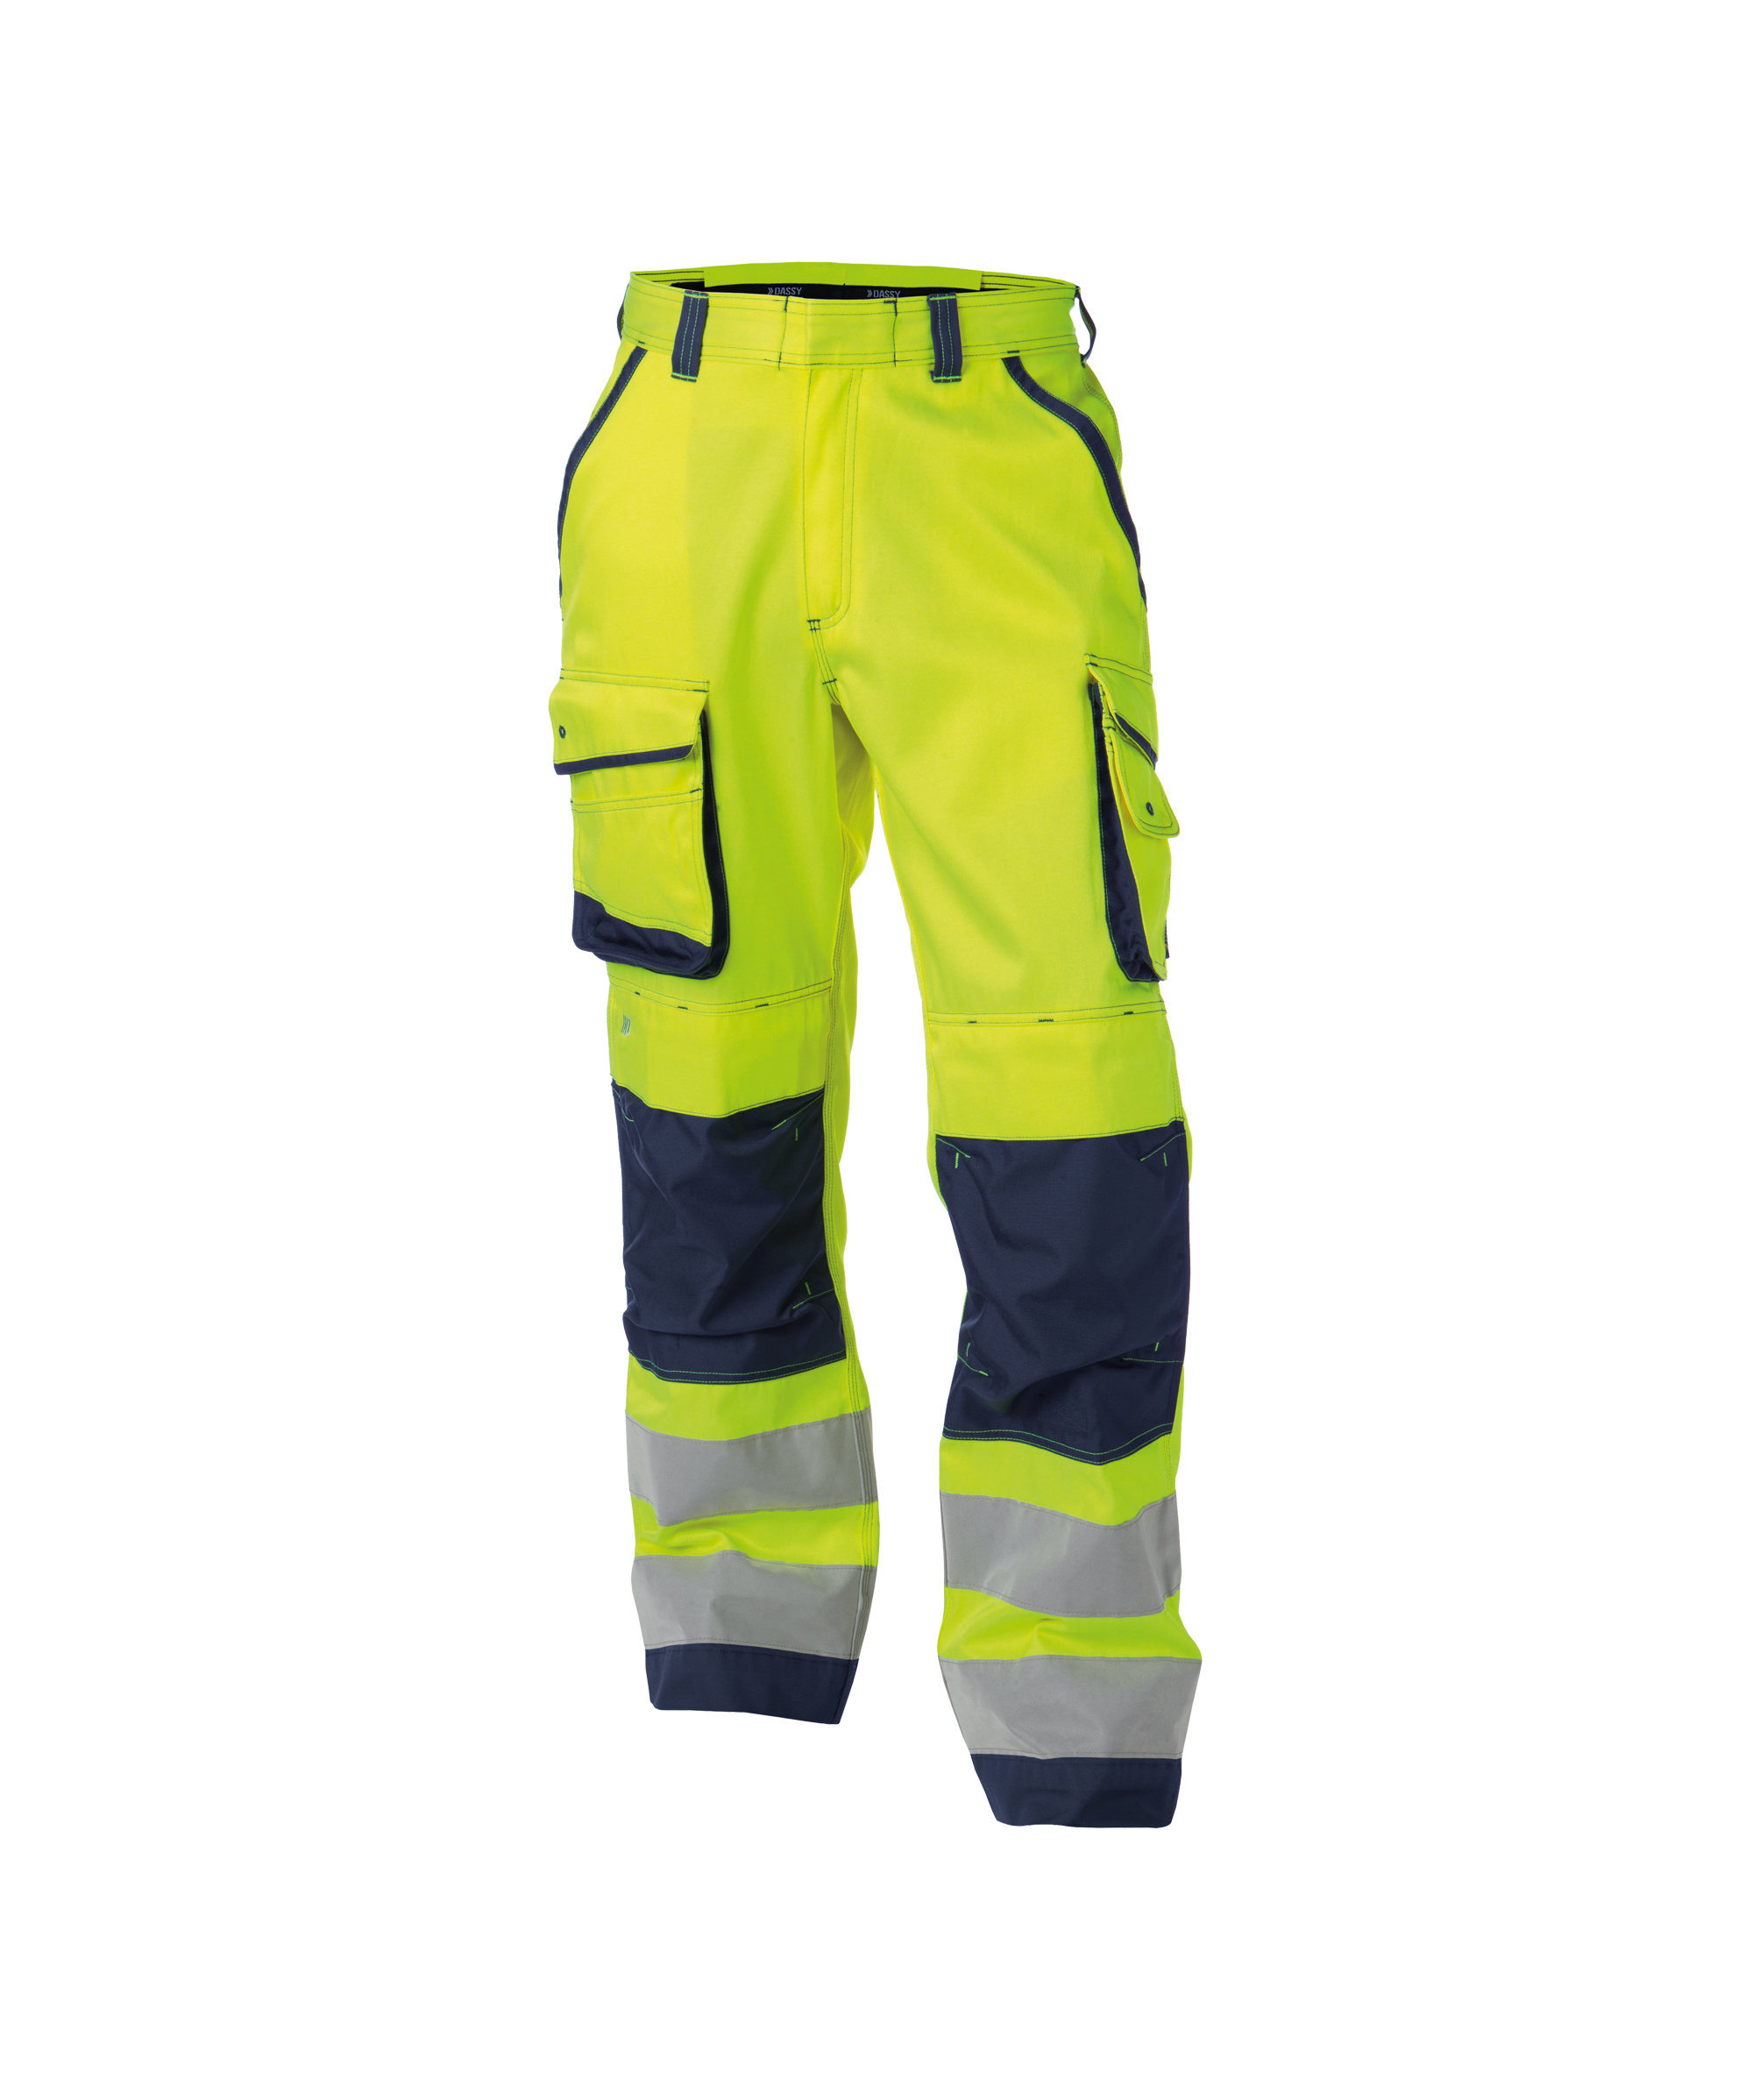 chicago_high-visibility-work-trousers-with-knee-pockets_fluo-yellow-navy_front.jpg